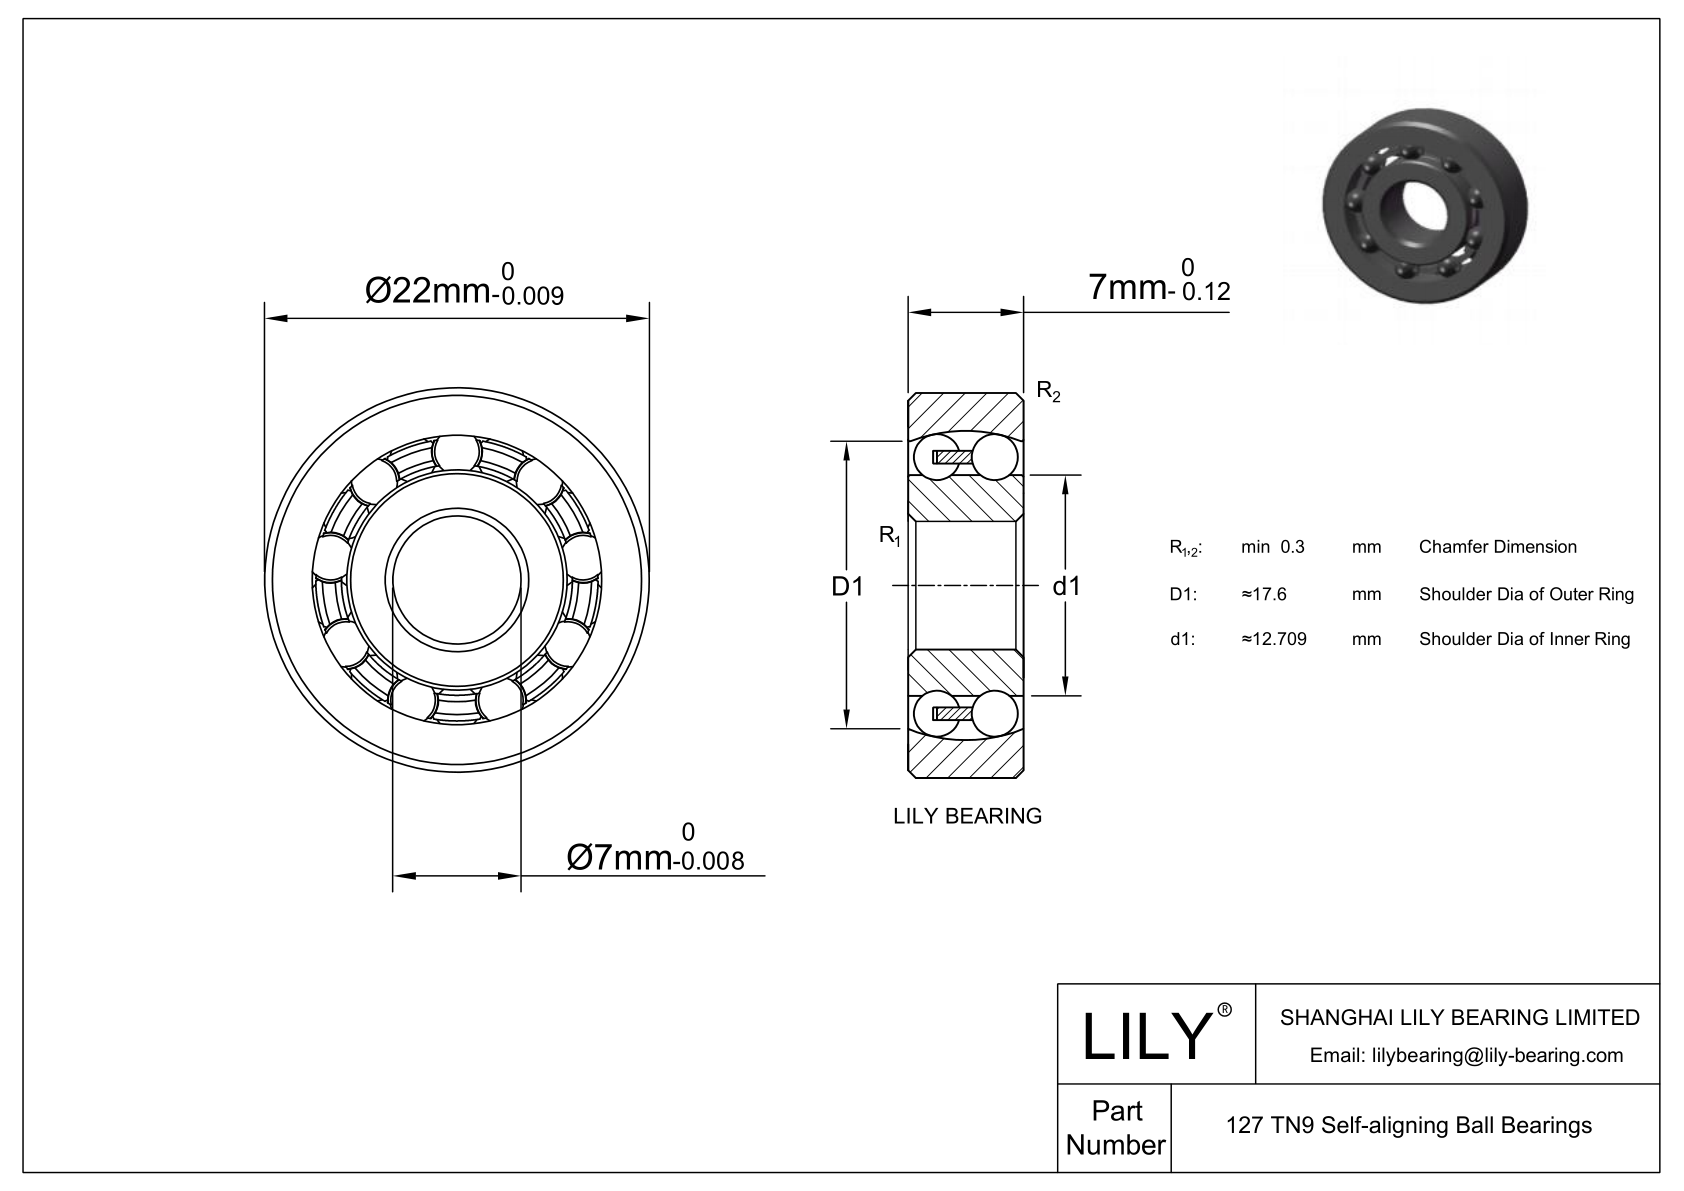 CE127SC Silicon Carbide Self Aligning Ball Bearings cad drawing